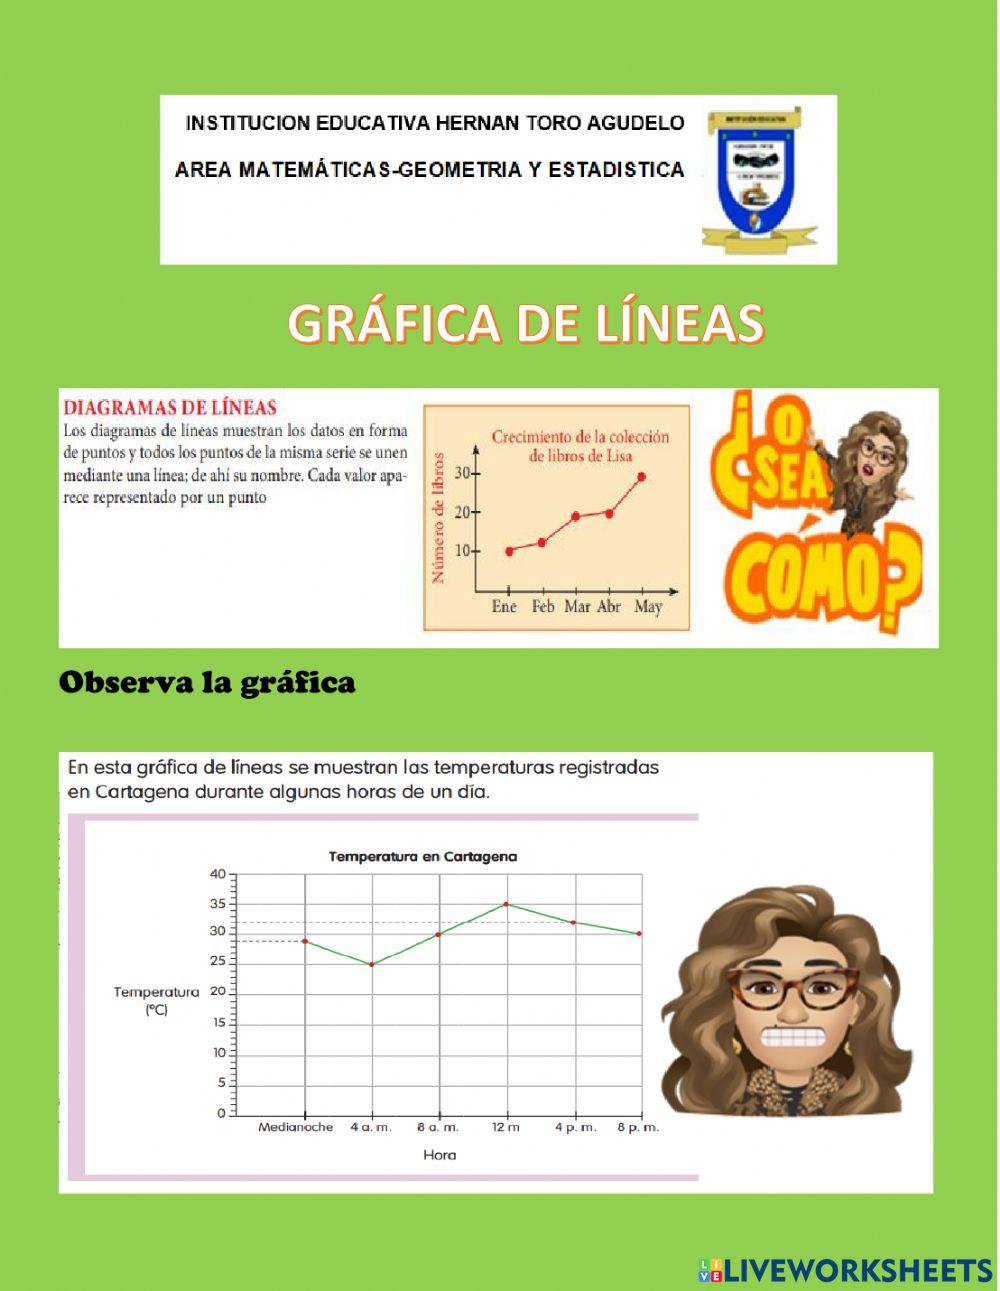 Grafica lineal